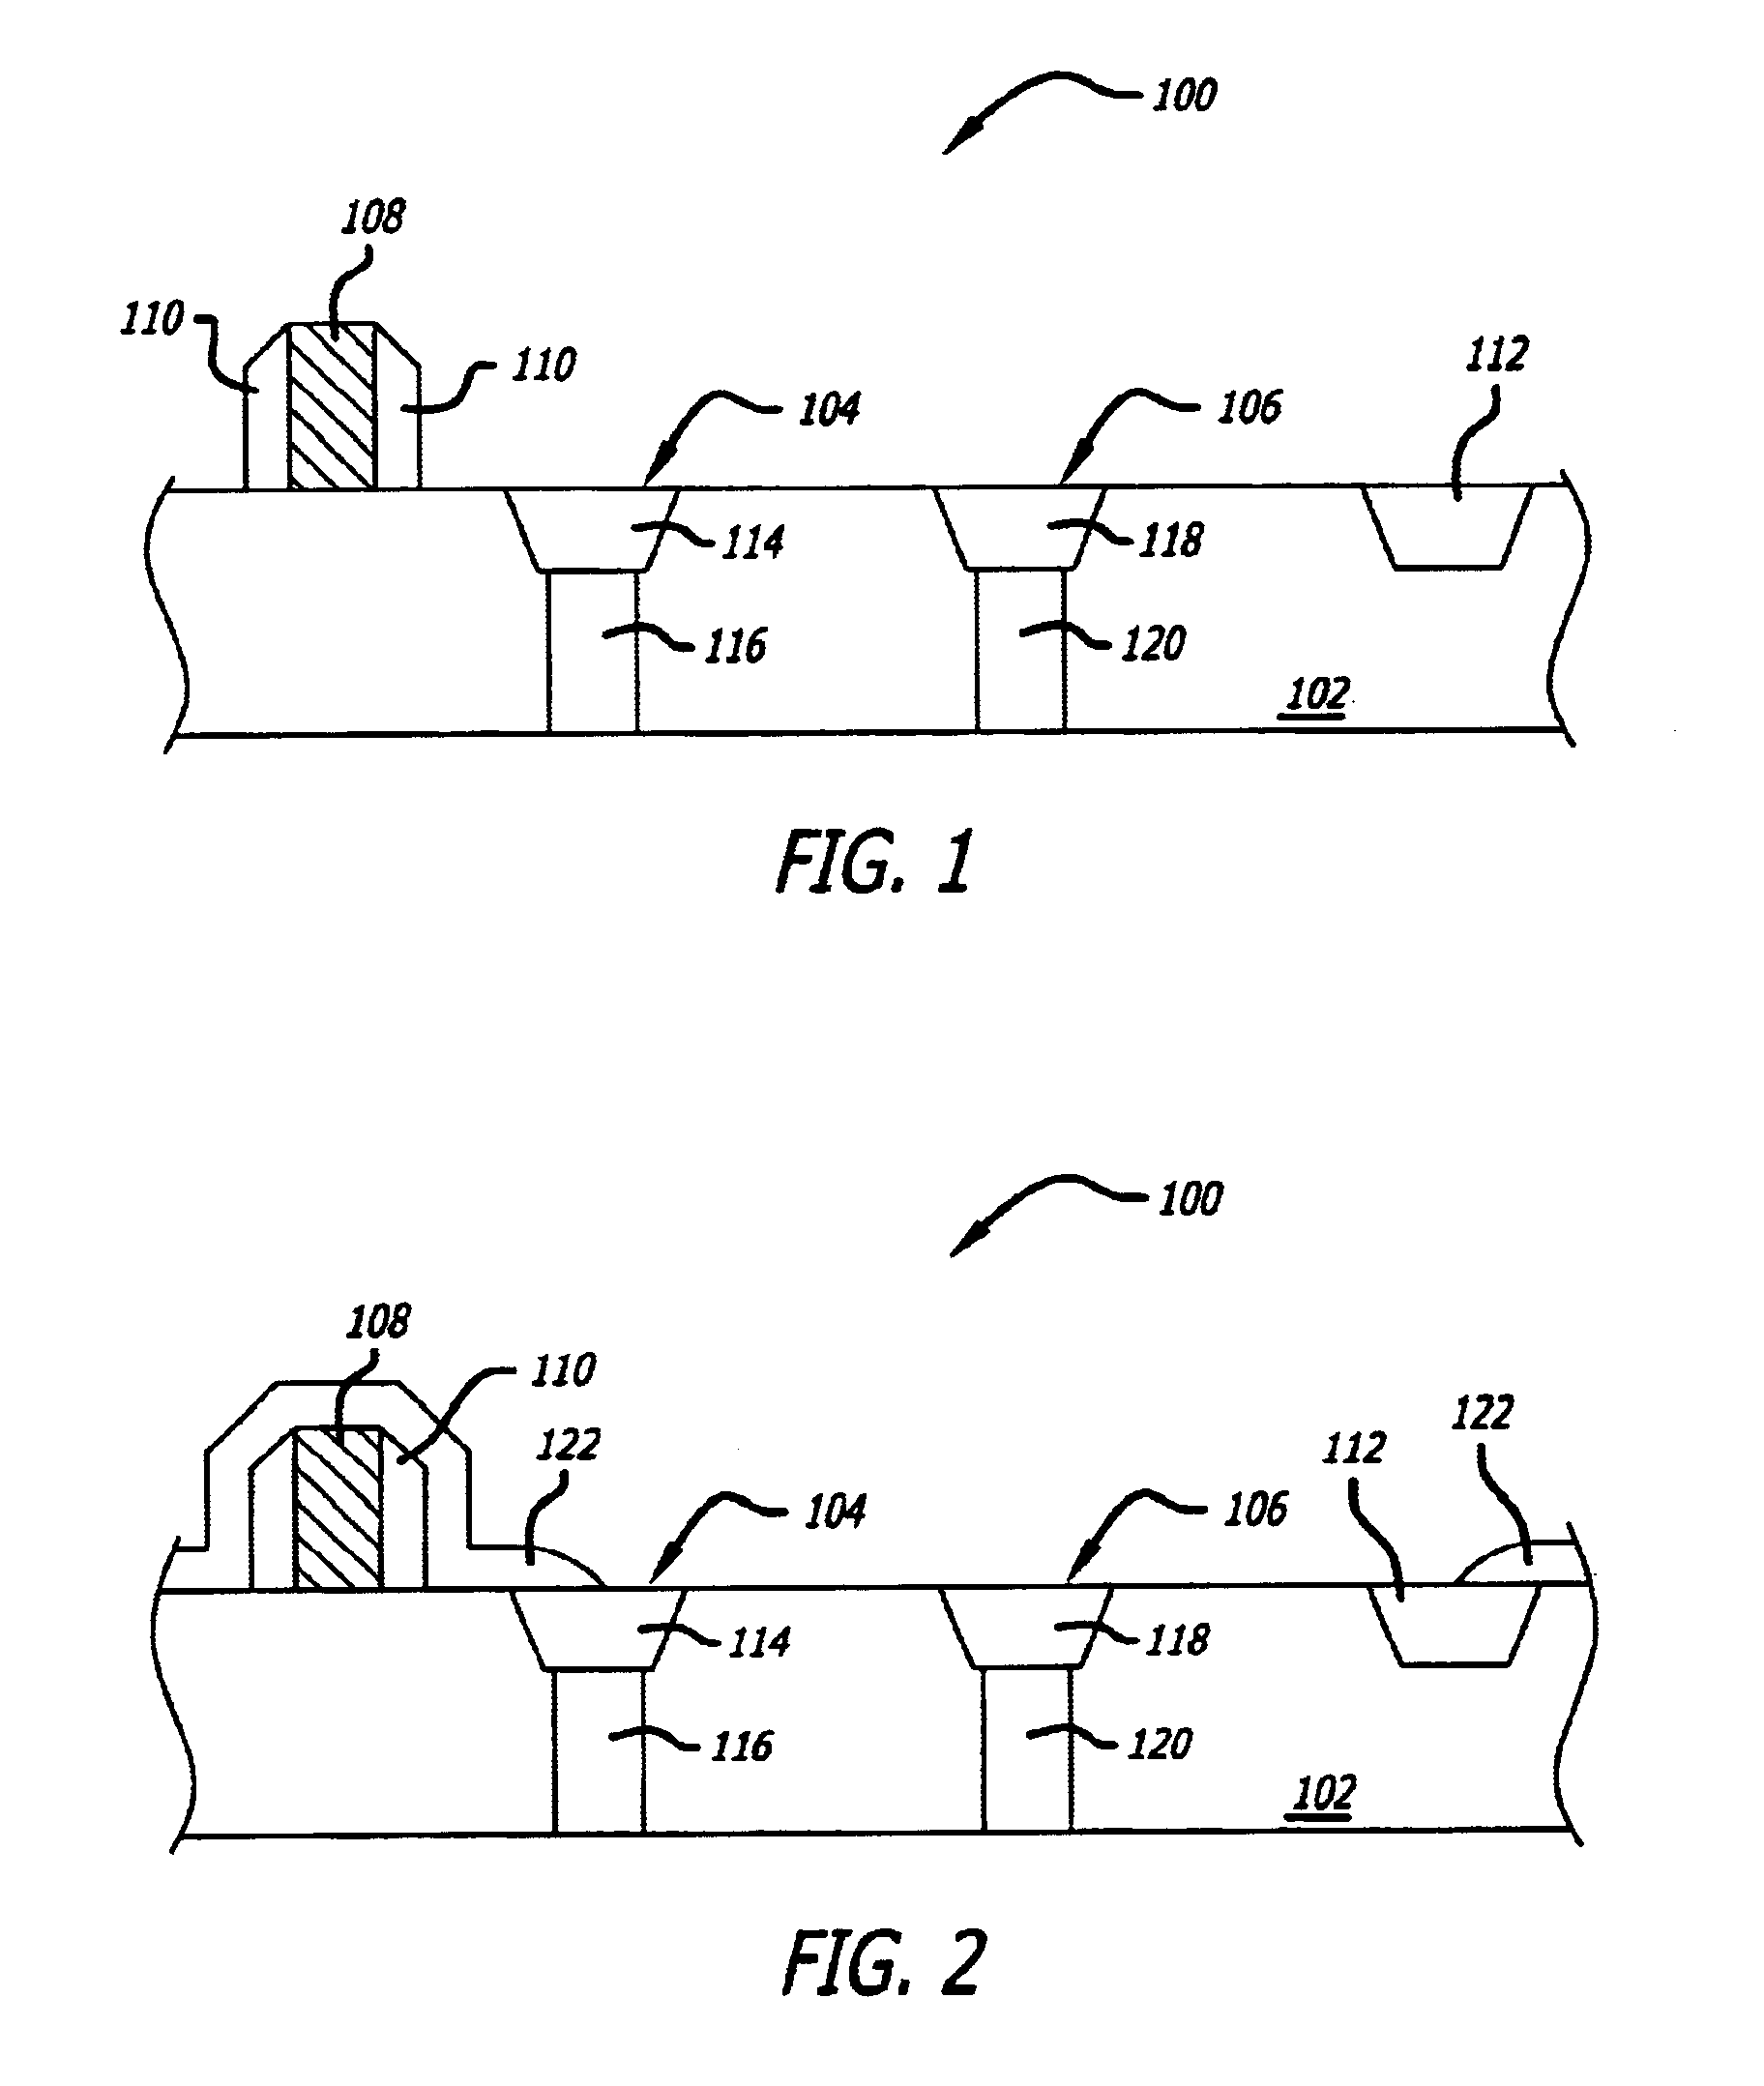 Method of removing a sacrificial emitter feature in a BICMOS process with a super self-aligned BJT